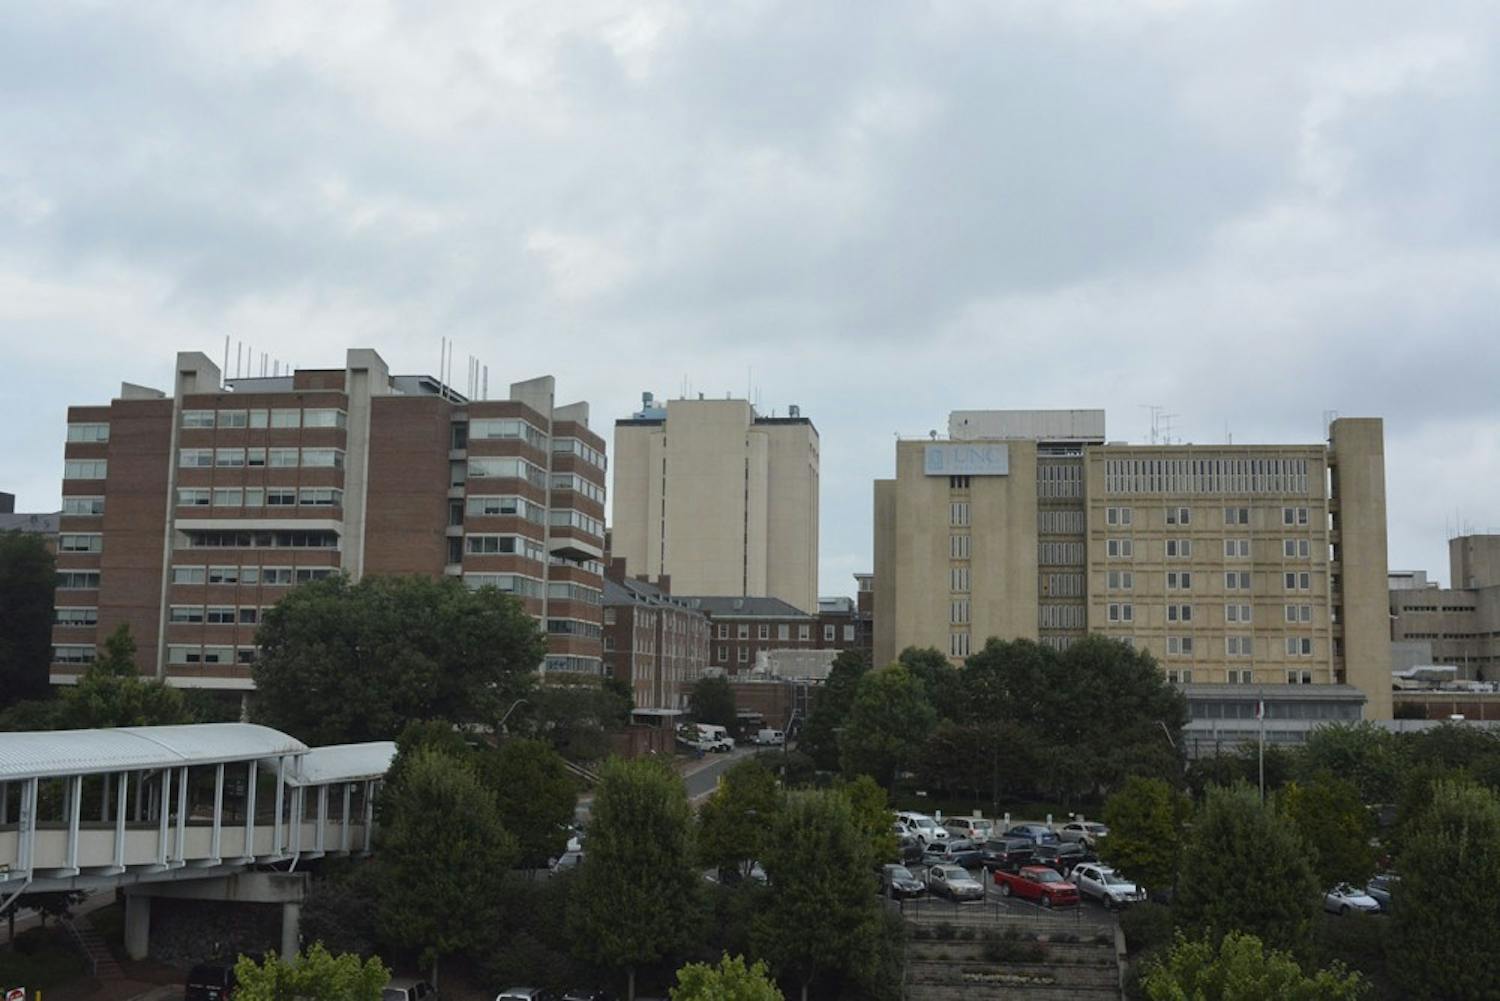 UNC Hospitals are expanding their area and also becoming more crowded.